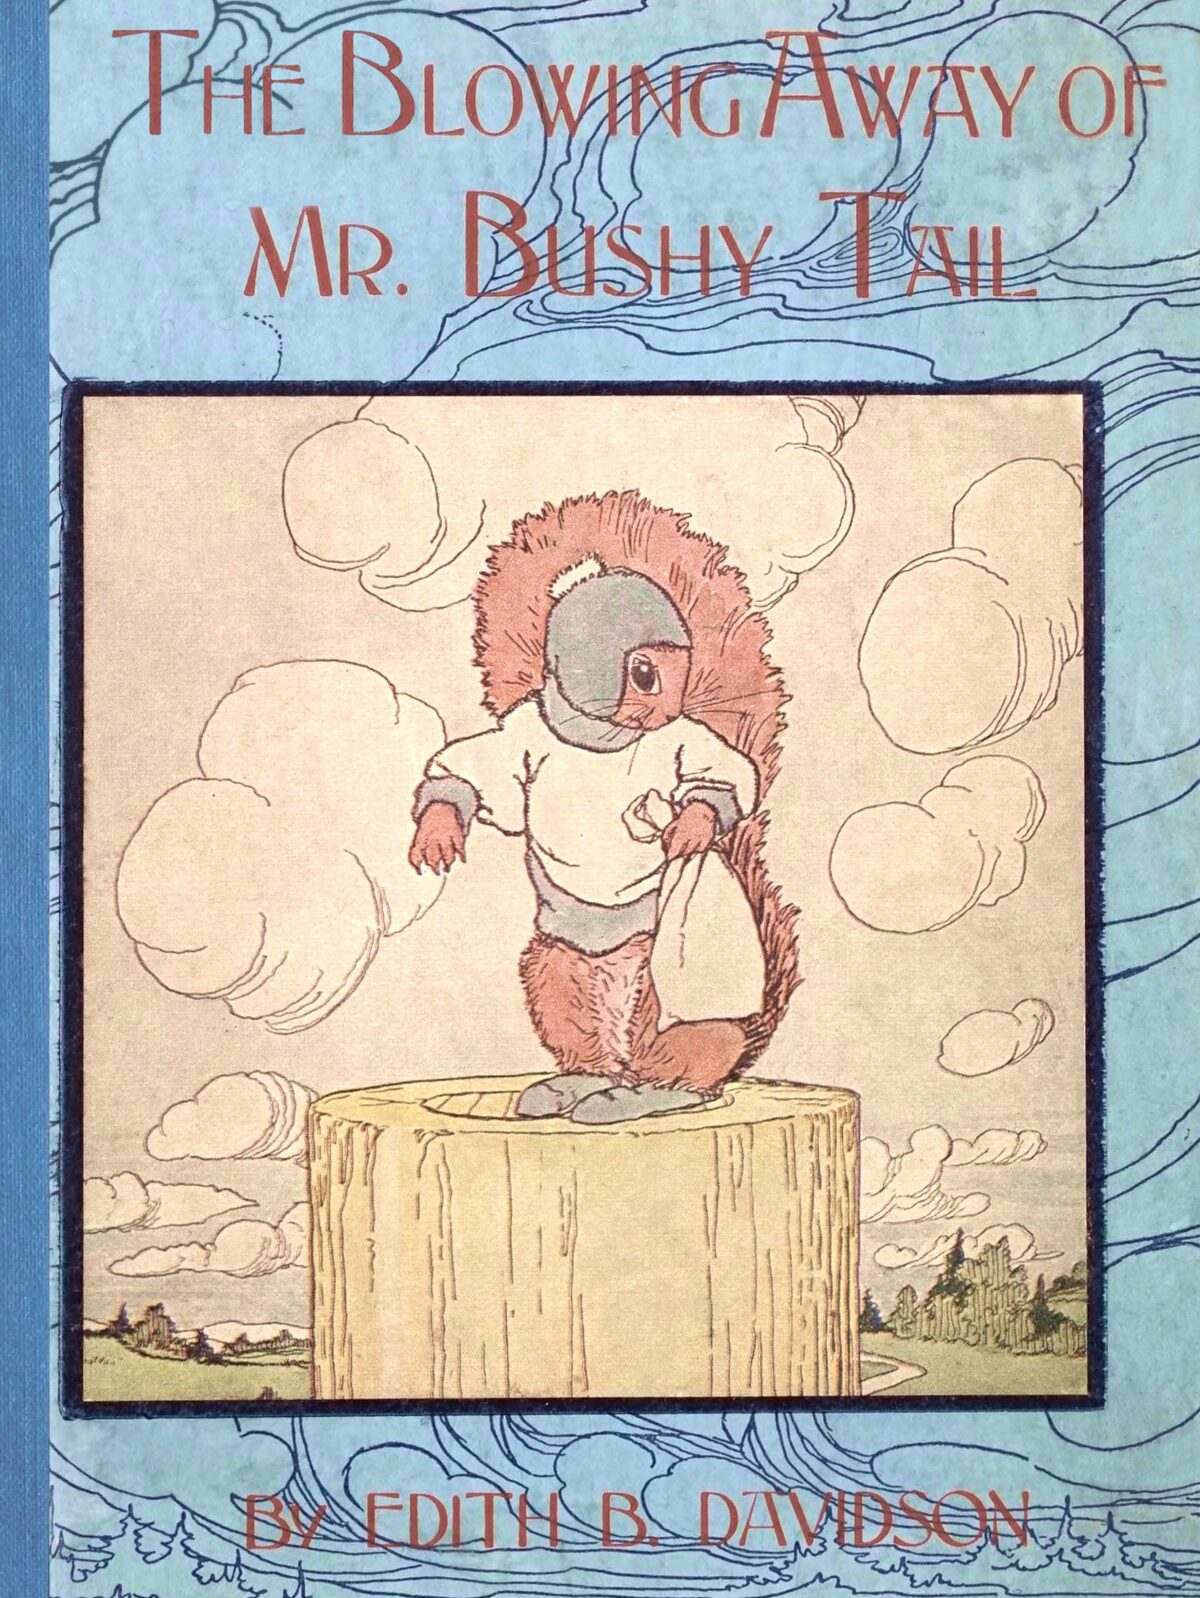 Front cover: The Blowing Away of Mr. Bushy Tail by Edith B. Davidson